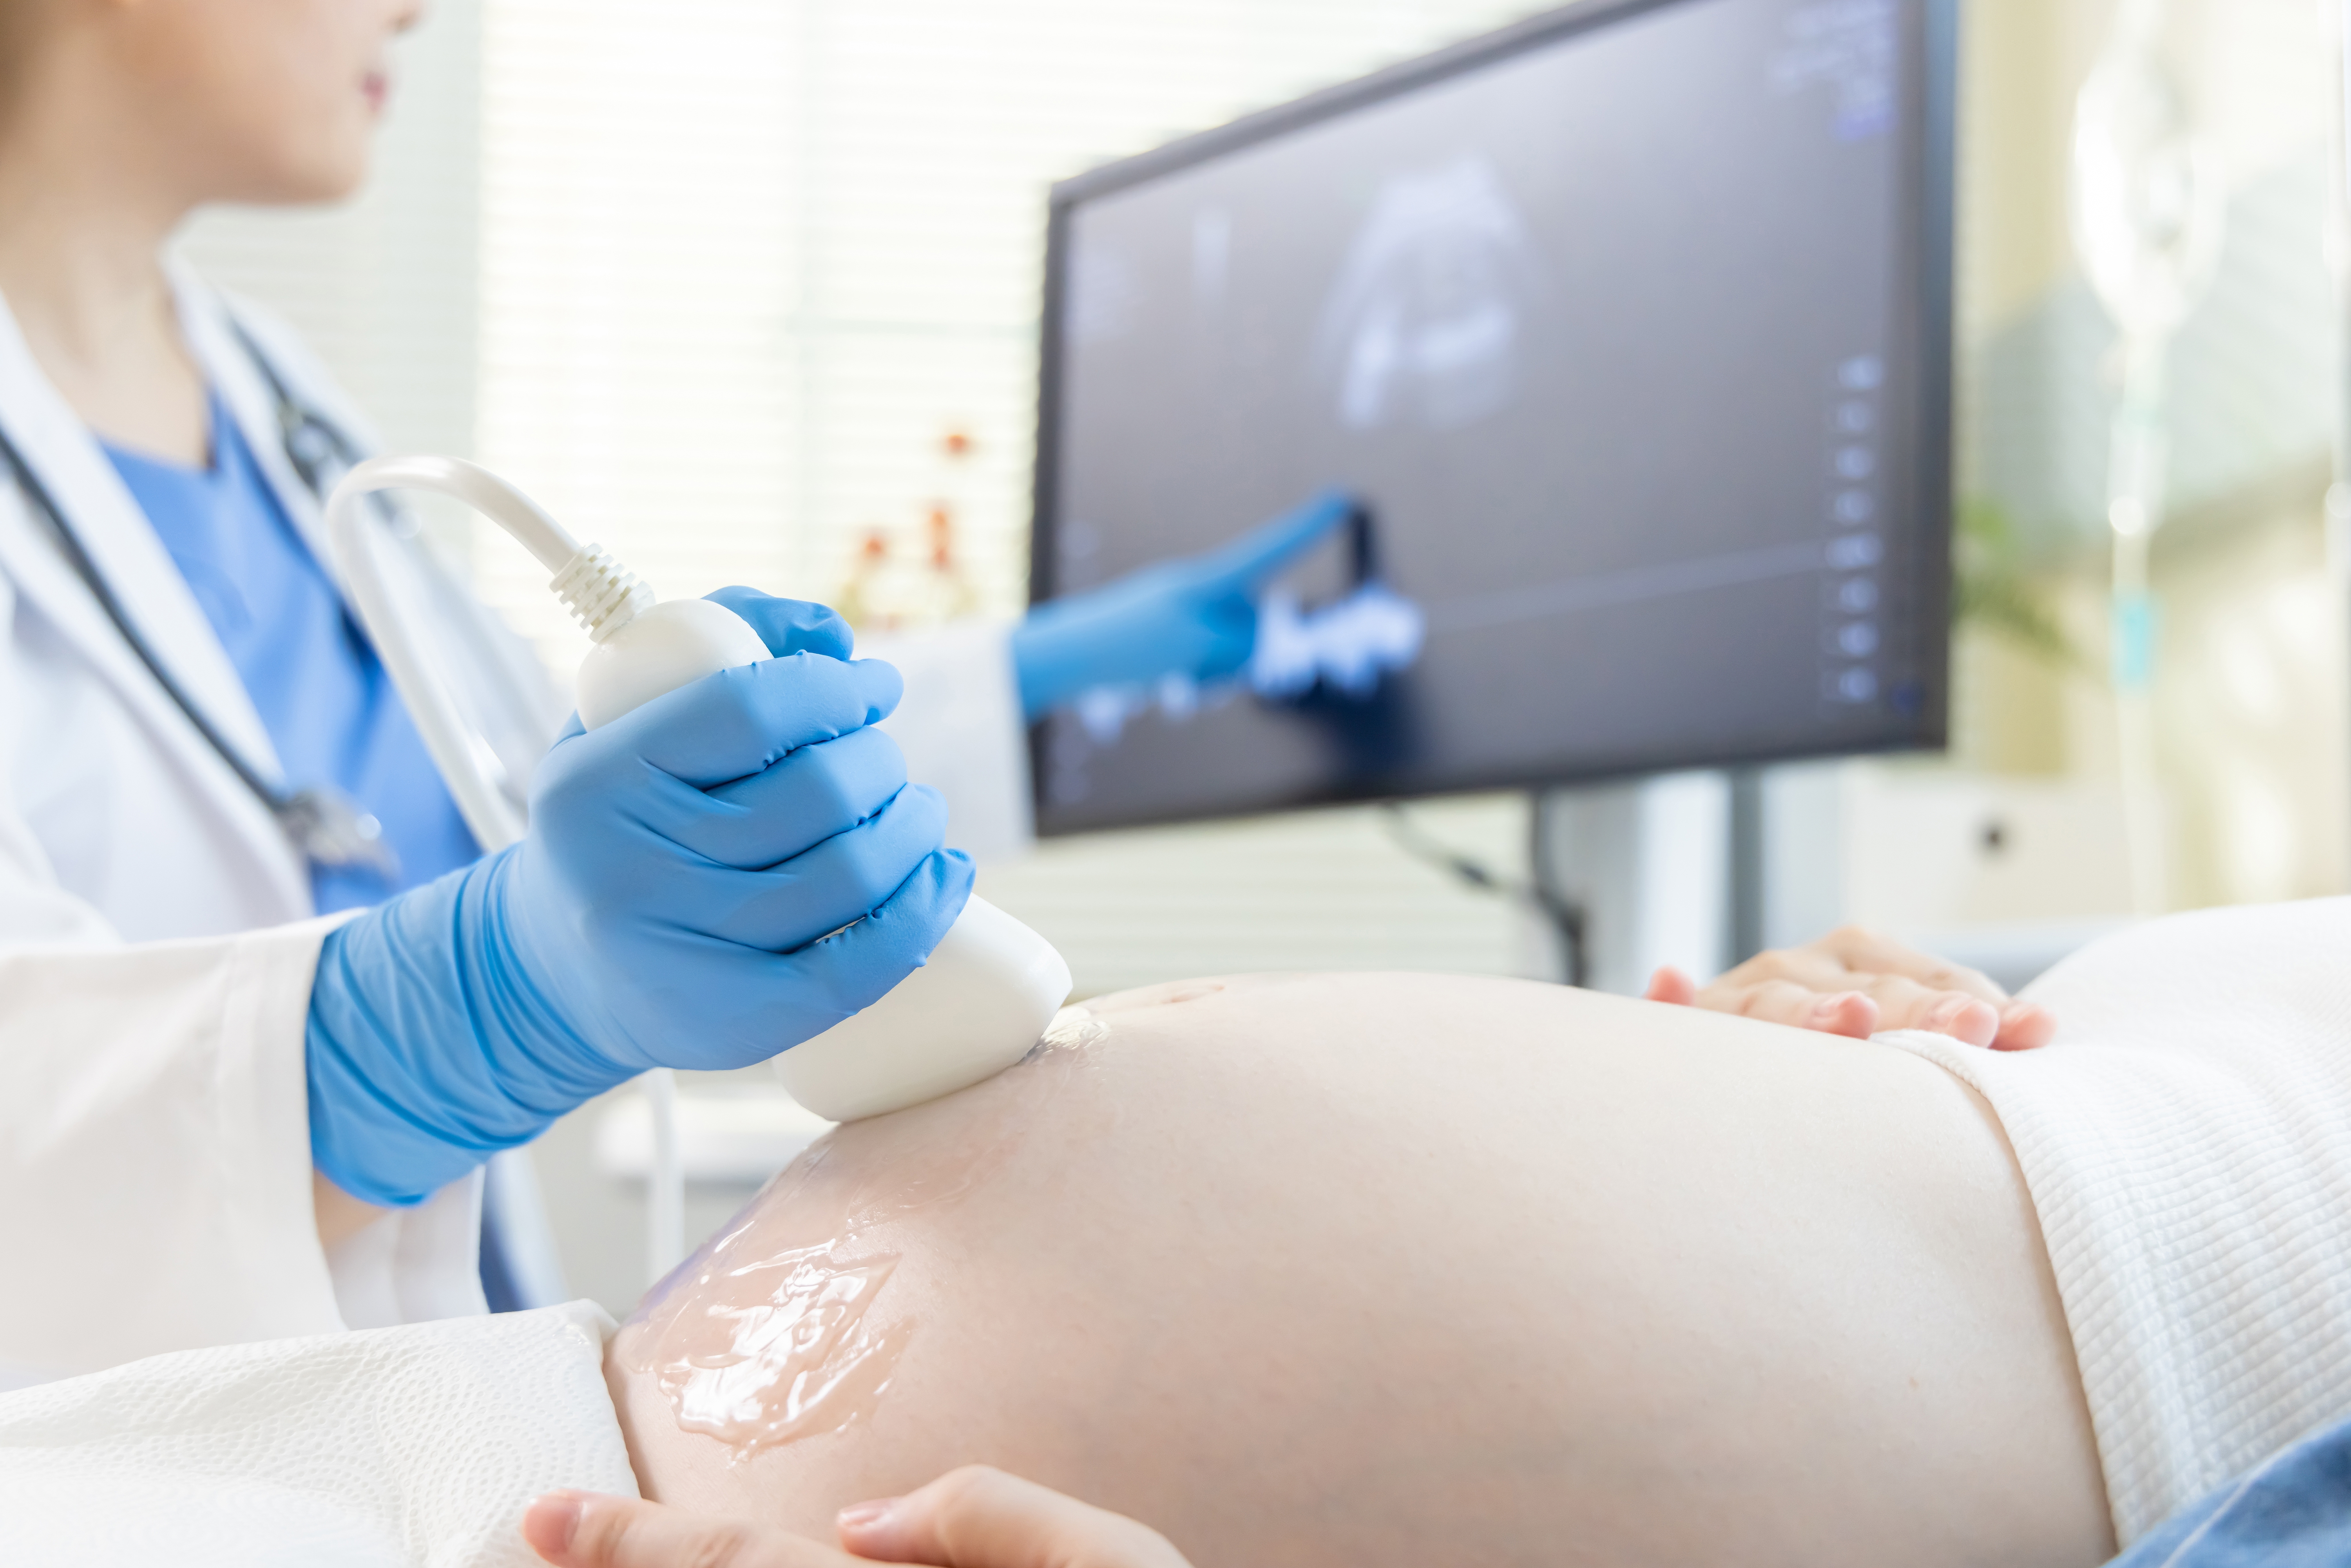 A pregnant woman getting her ultrasound done | Source: Shutterstock